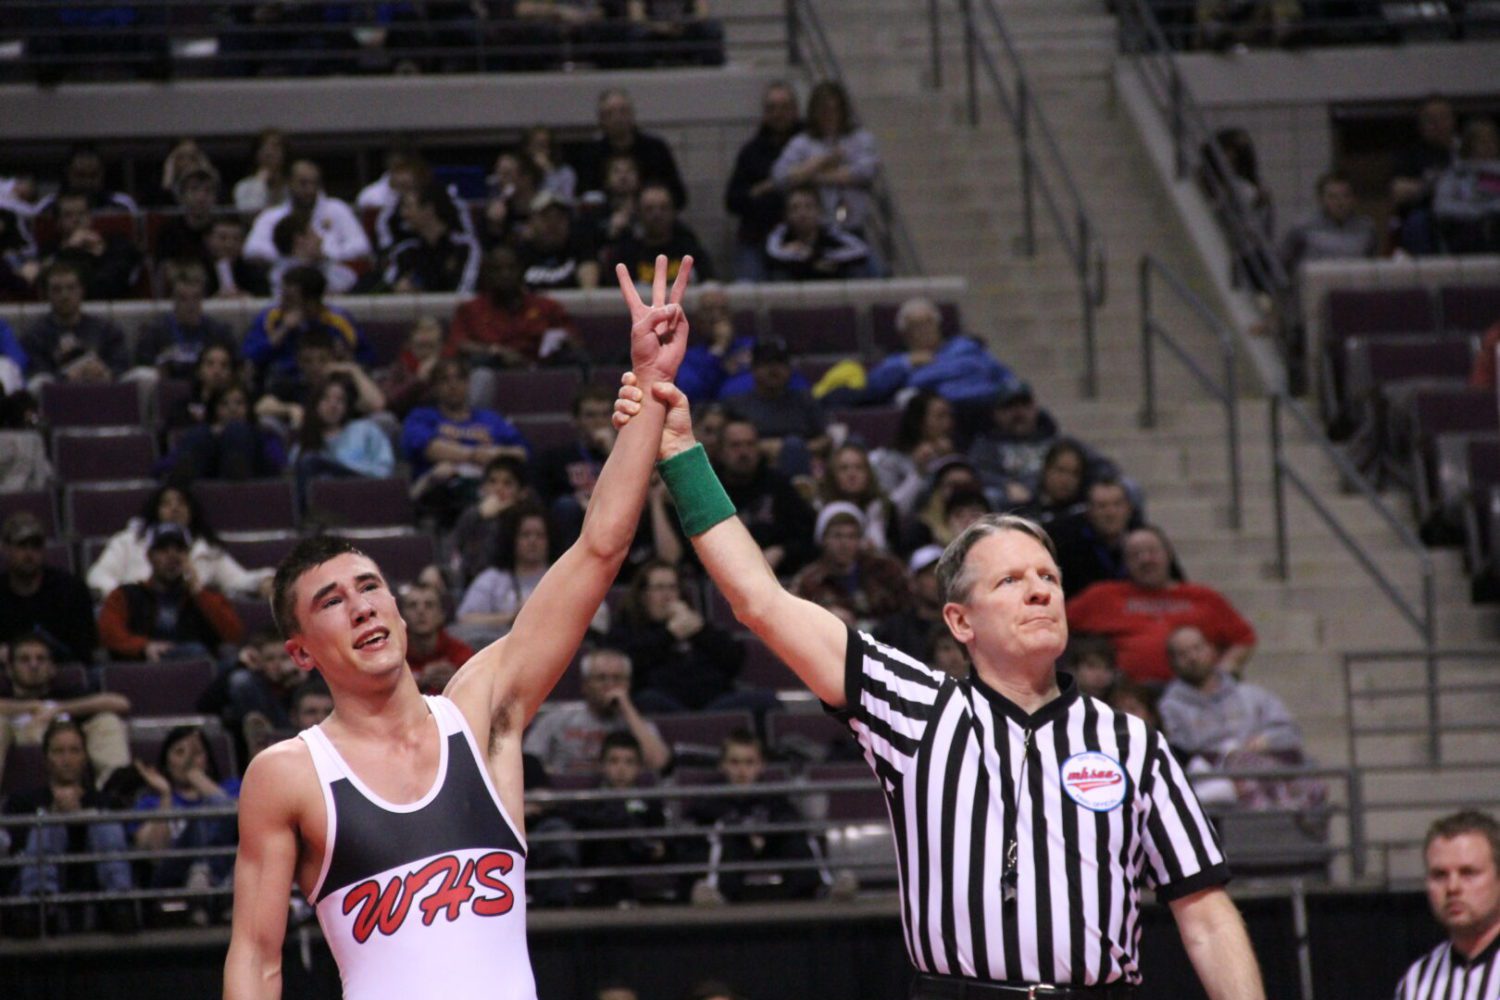 Highlights from Zack Cooper’s third wrestling state championship [VIDEO]